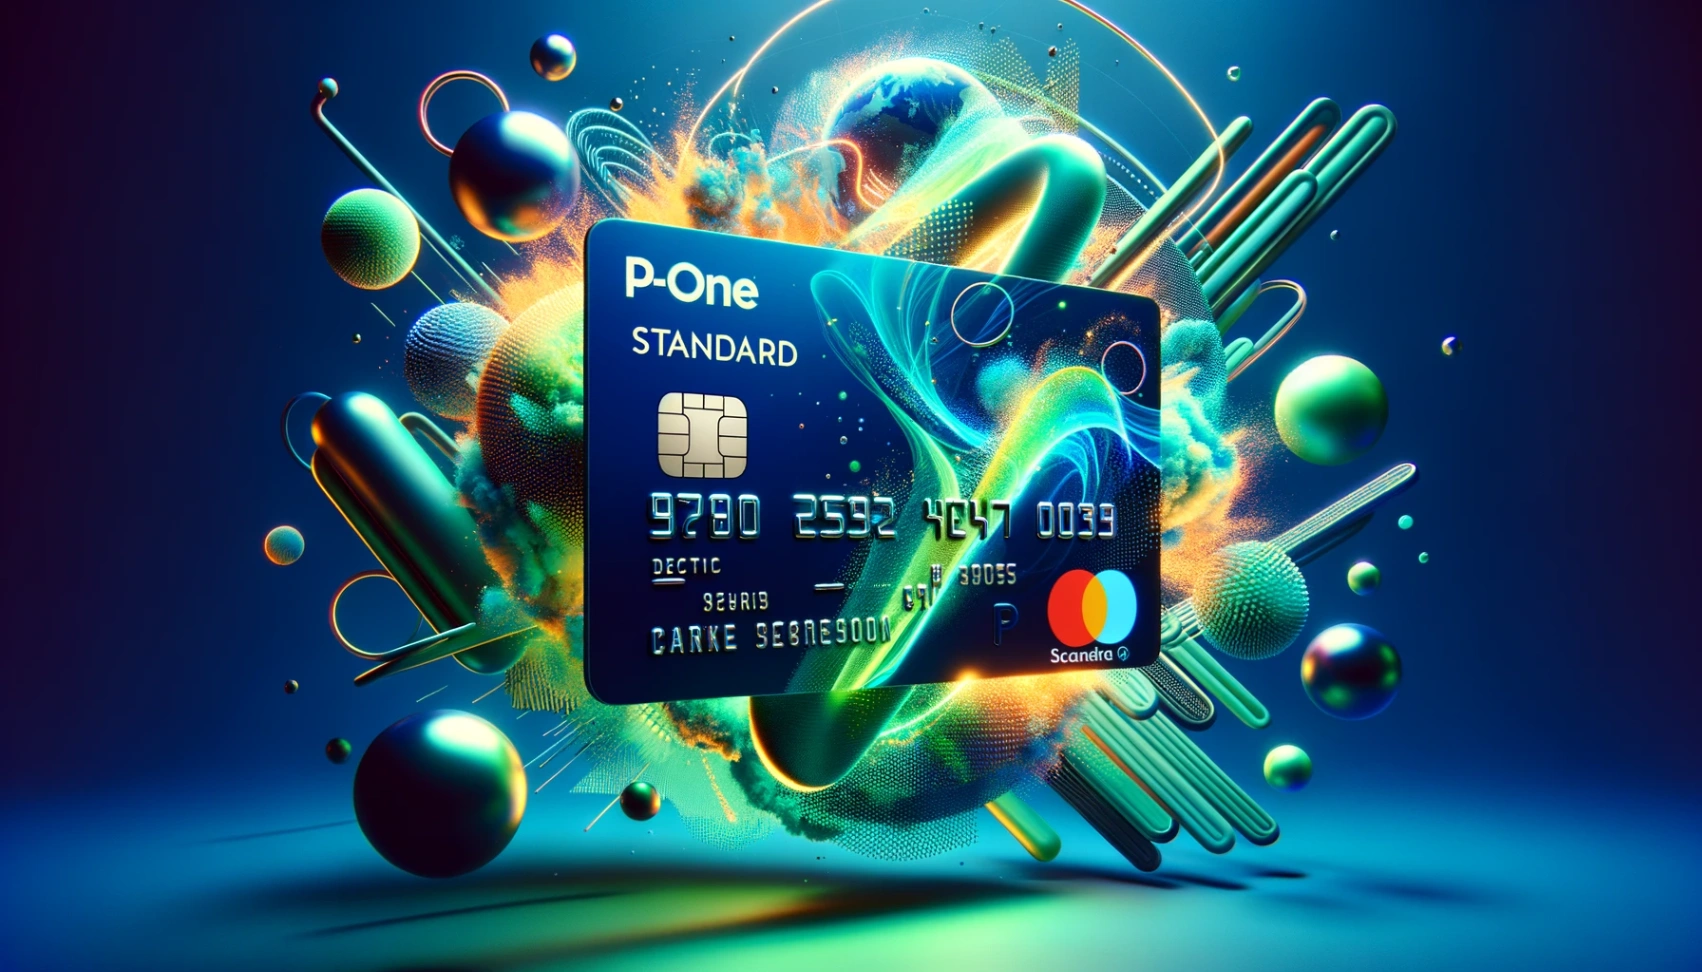 P-One Standard Credit Card: How to Order Guide